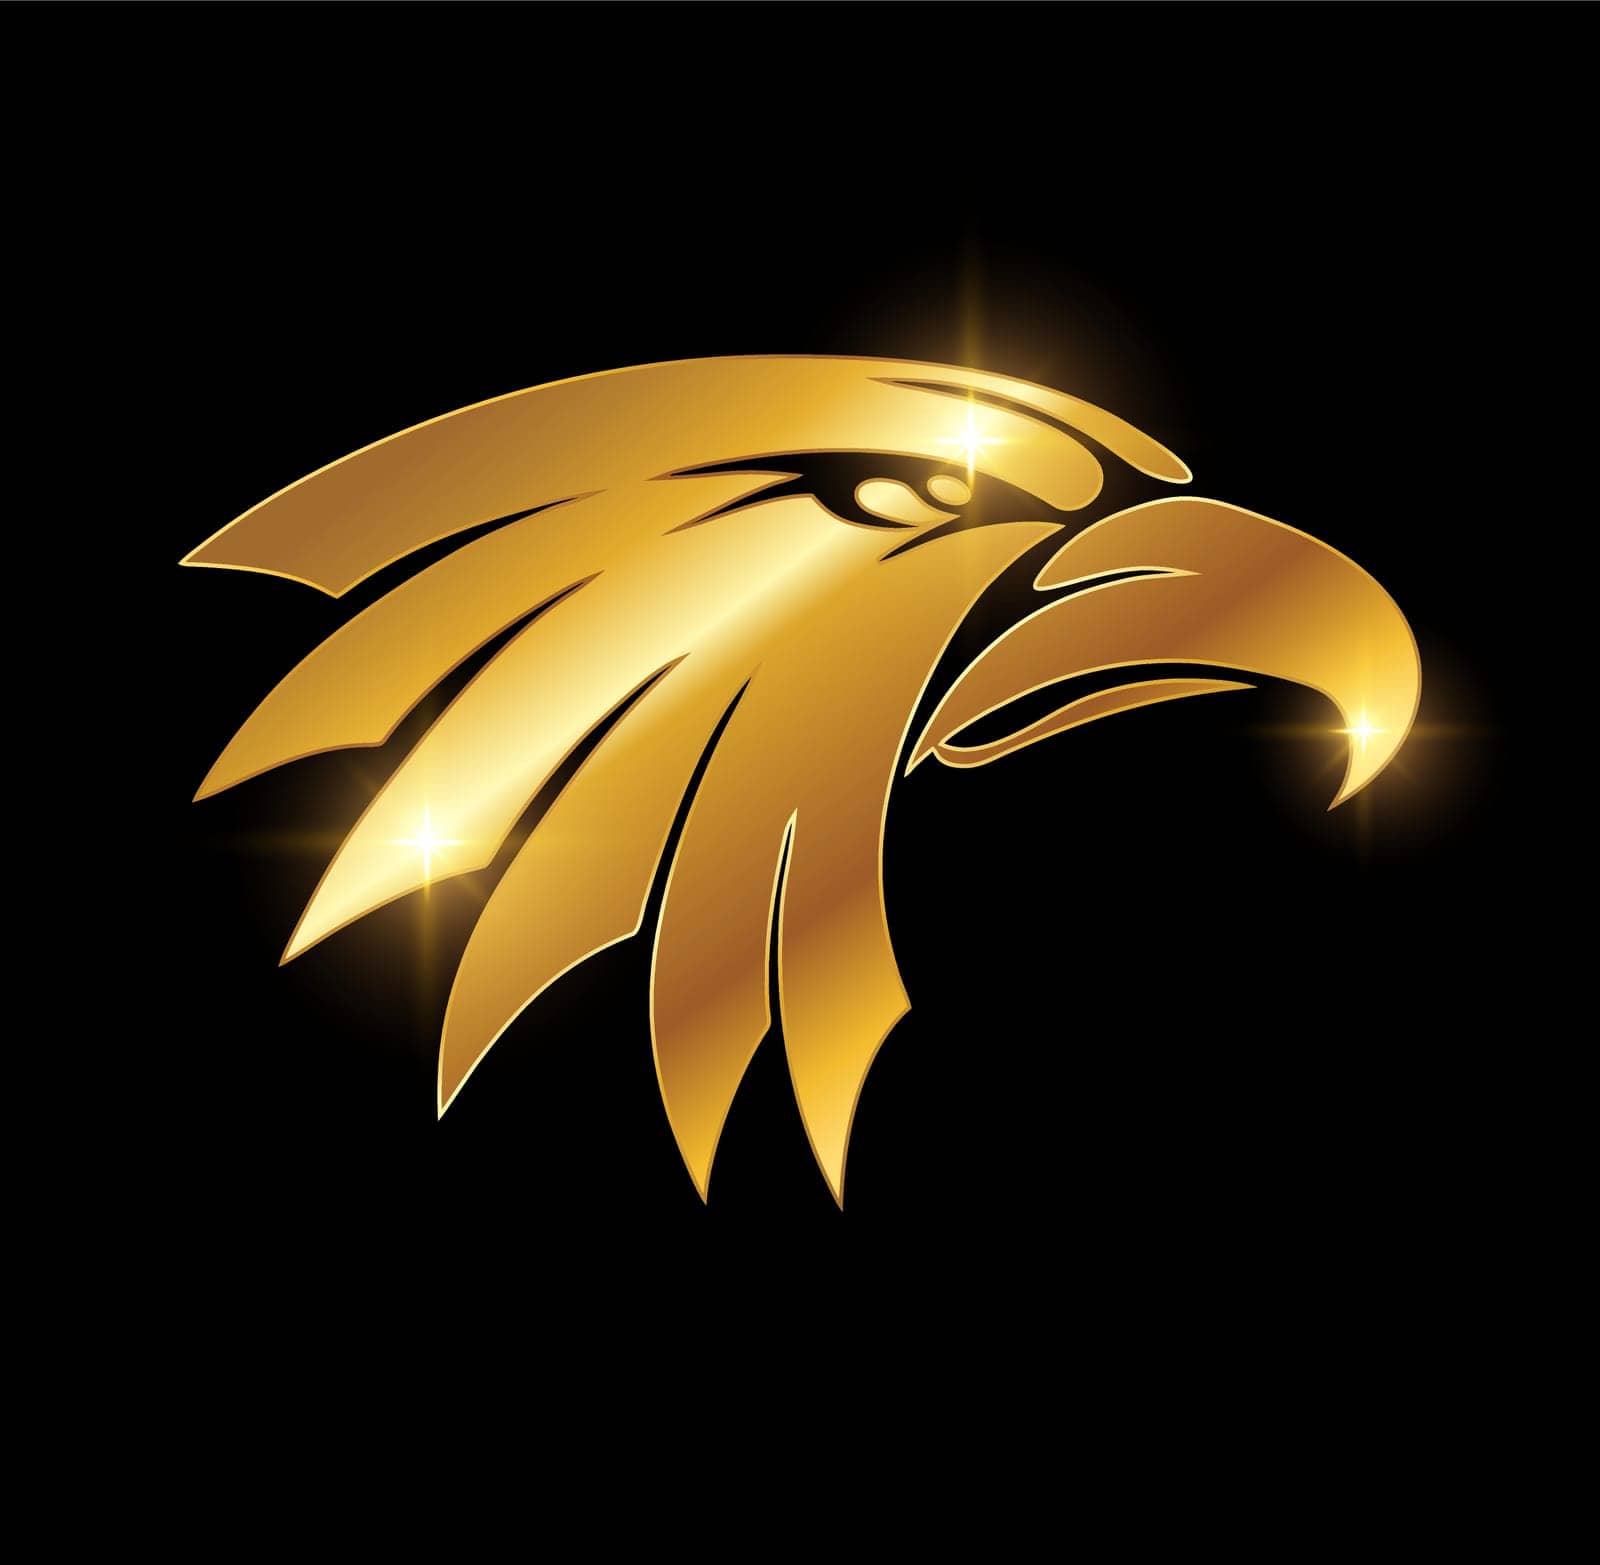 Golden Eagle Head Logo Sign by Up2date